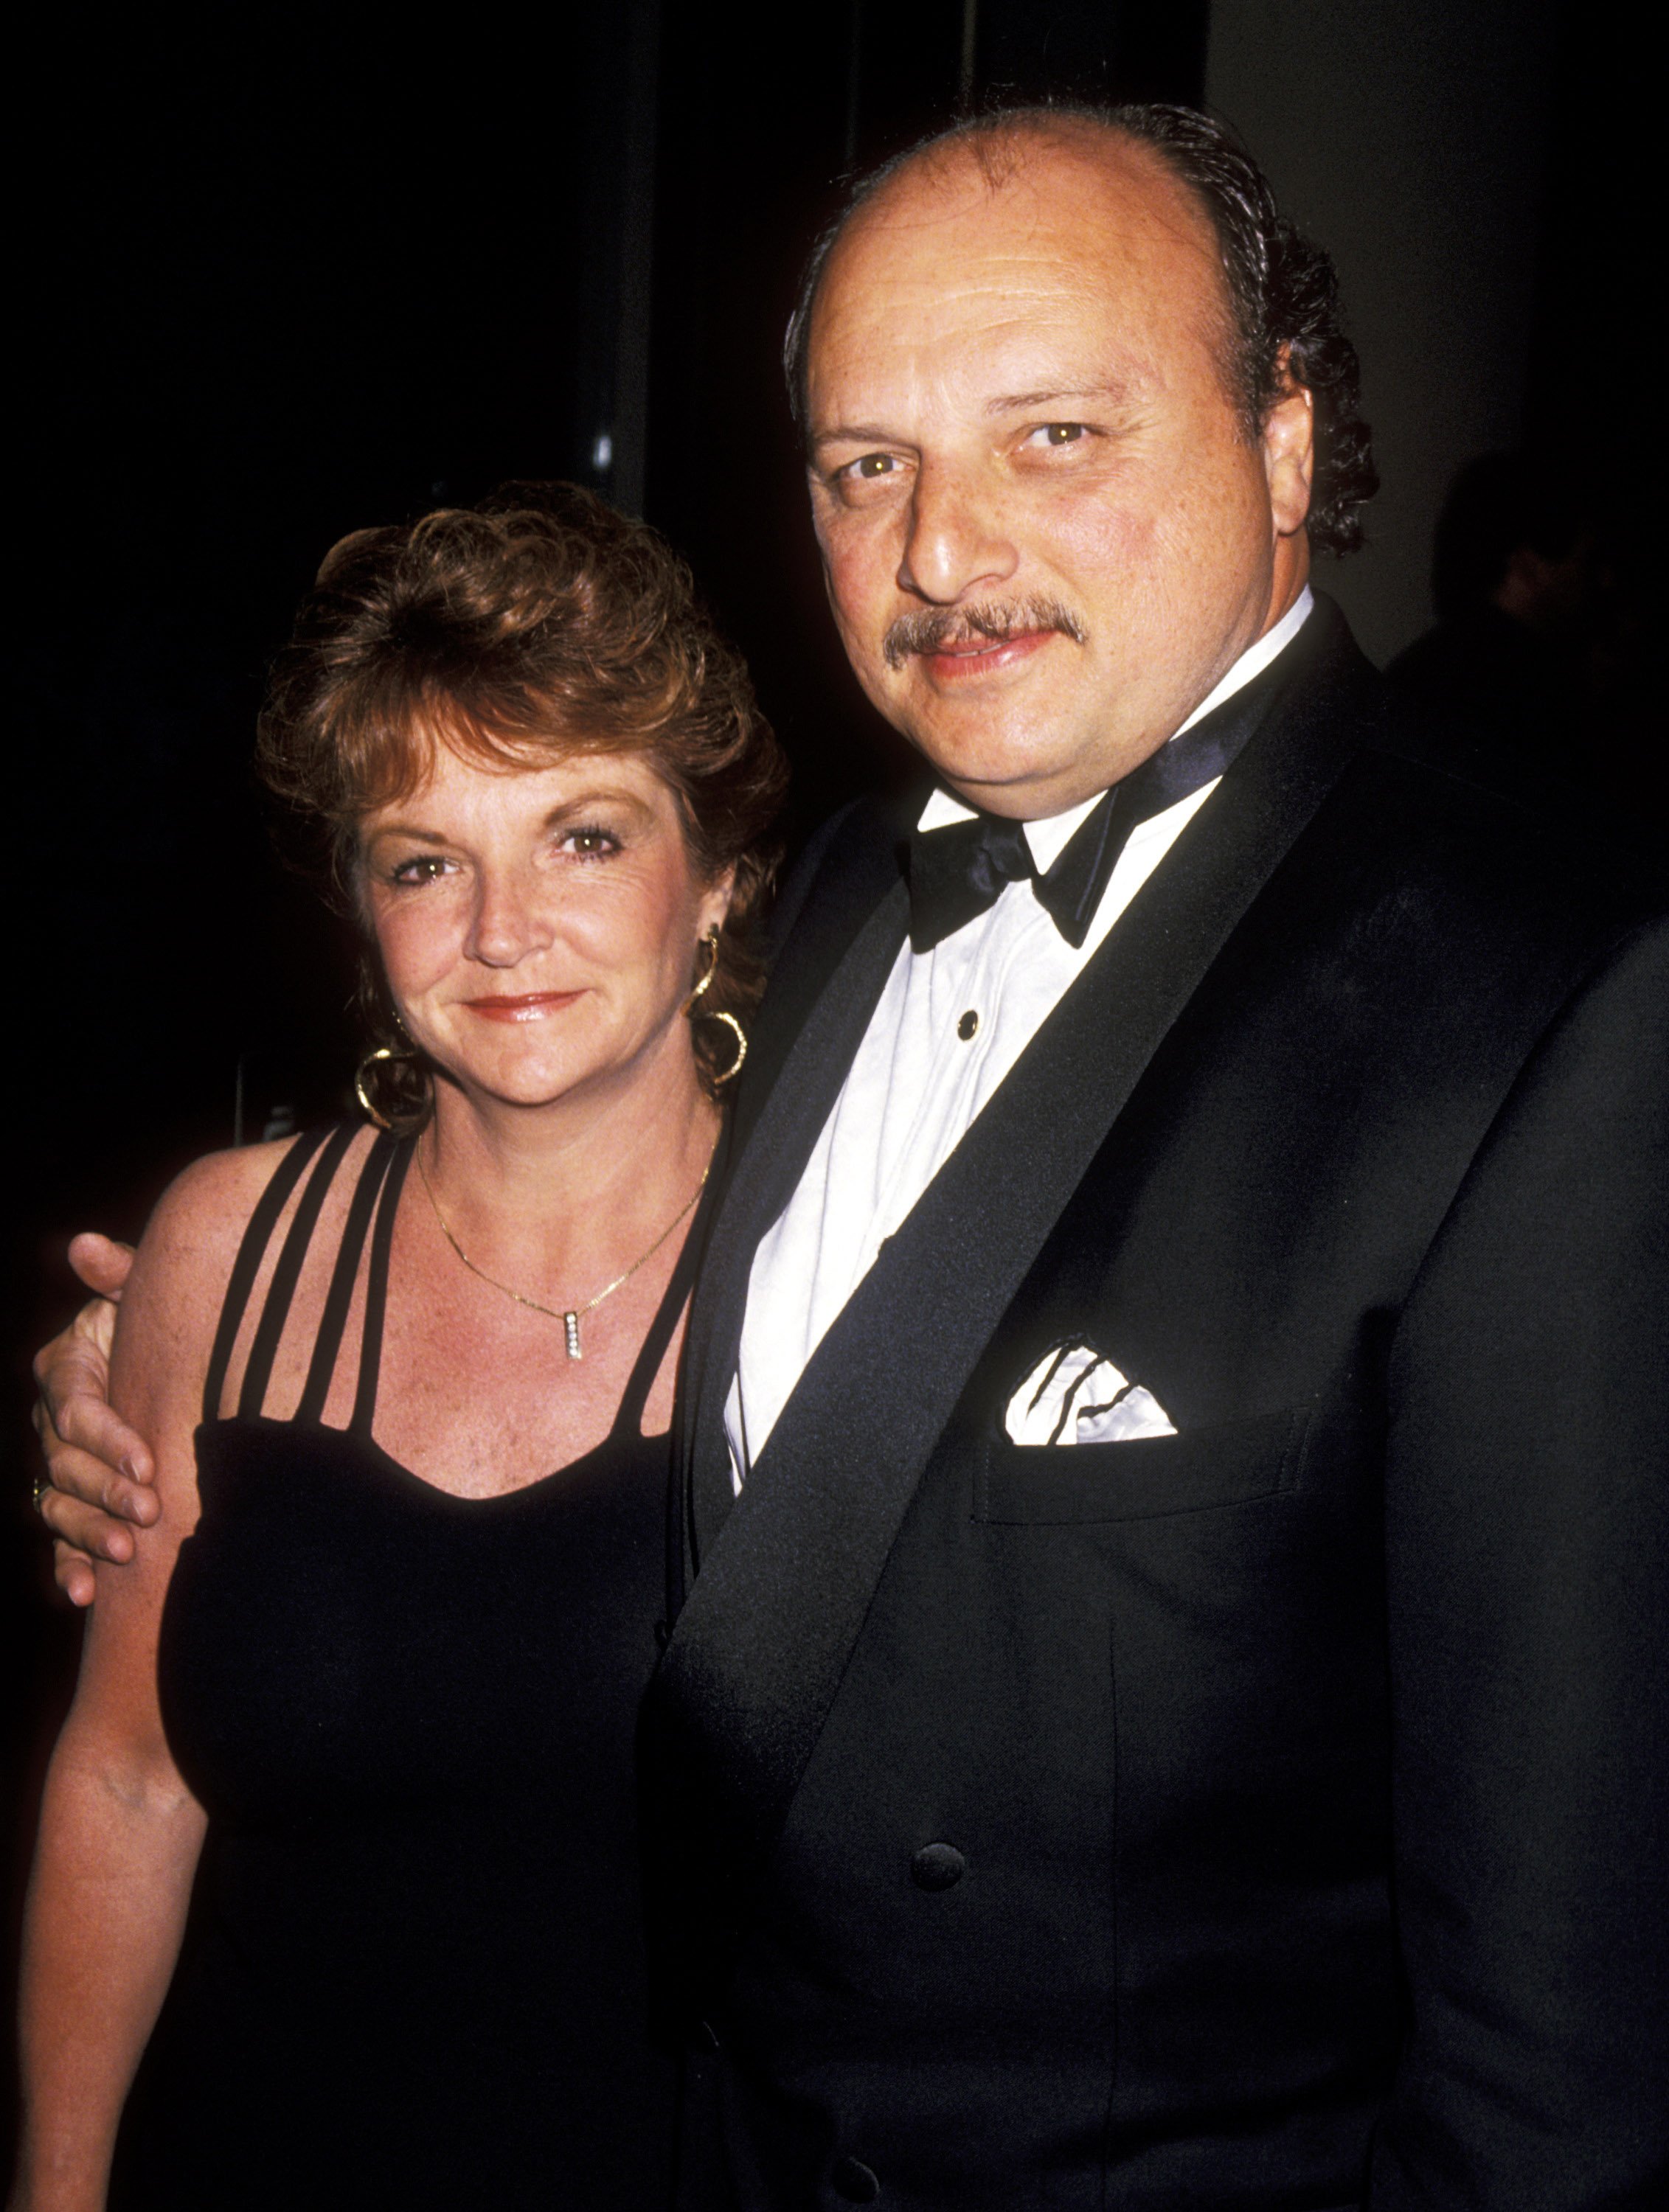 Dennis Franz and Joanie Zeck during 46th Annual Writers Guild Awards at Beverly Hilton Hotel in Beverly Hills, California. / Source: Getty Images